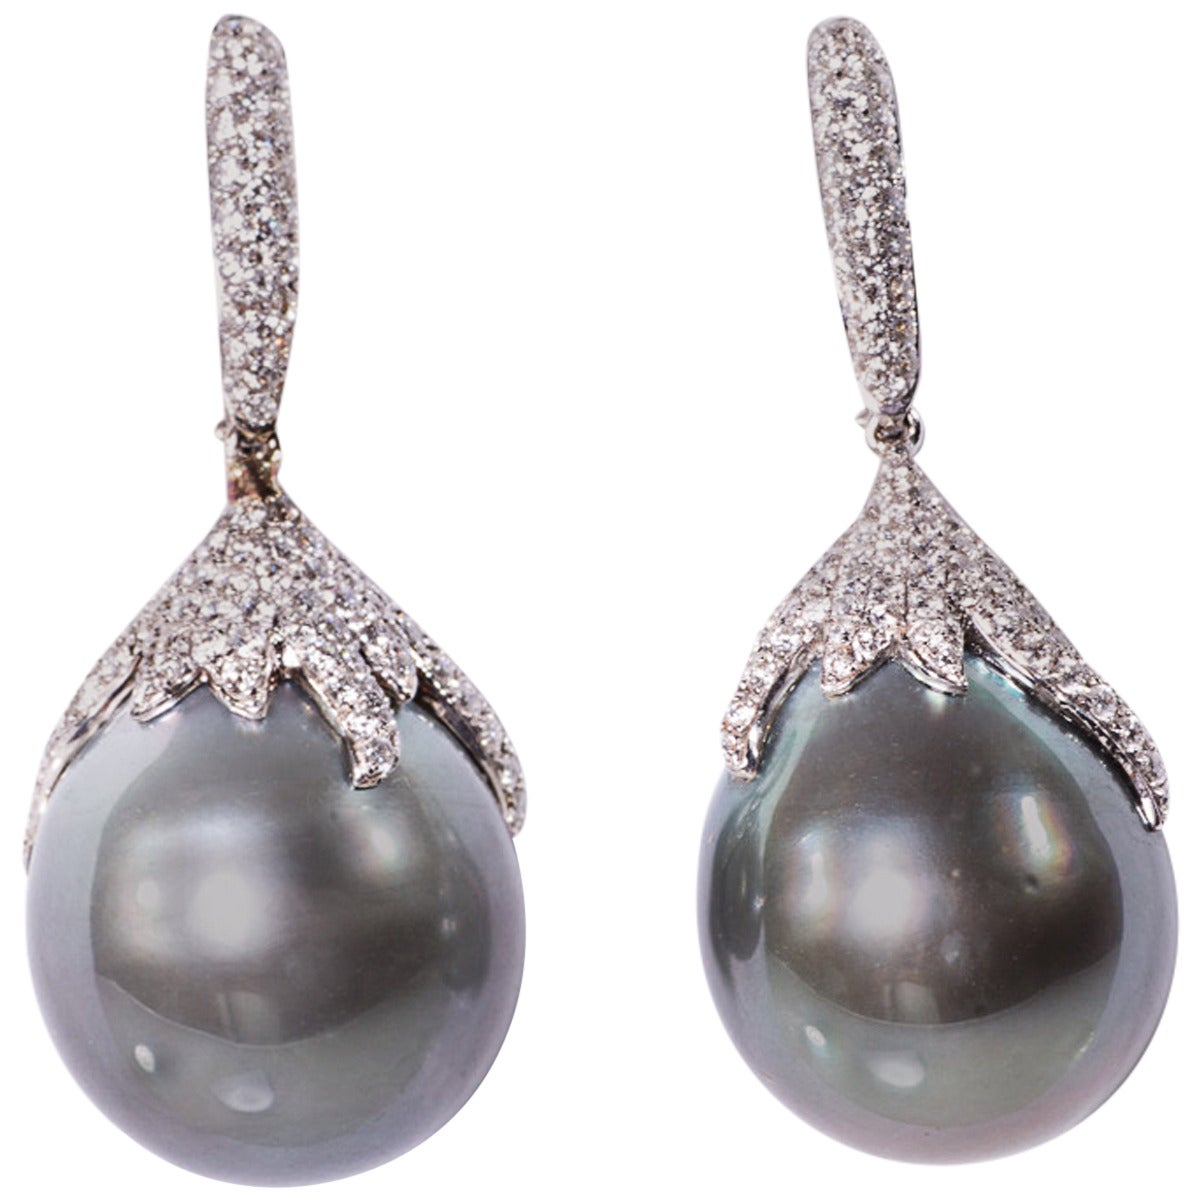 Magnificent Cultured Black South Sea Pearl and Diamond Earrings